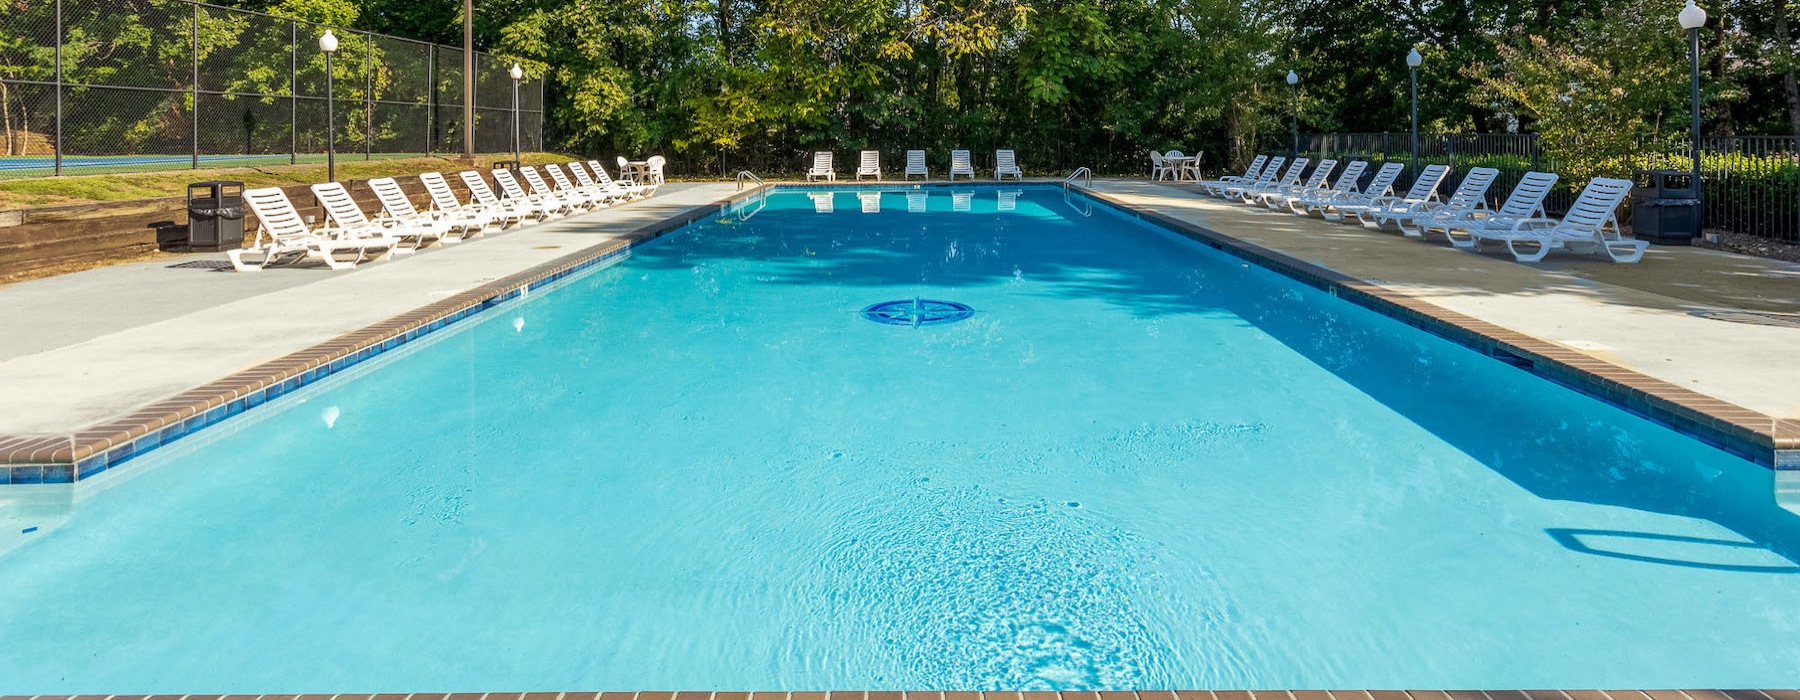 Large sparkling pool with large pool deck and lounge chairs